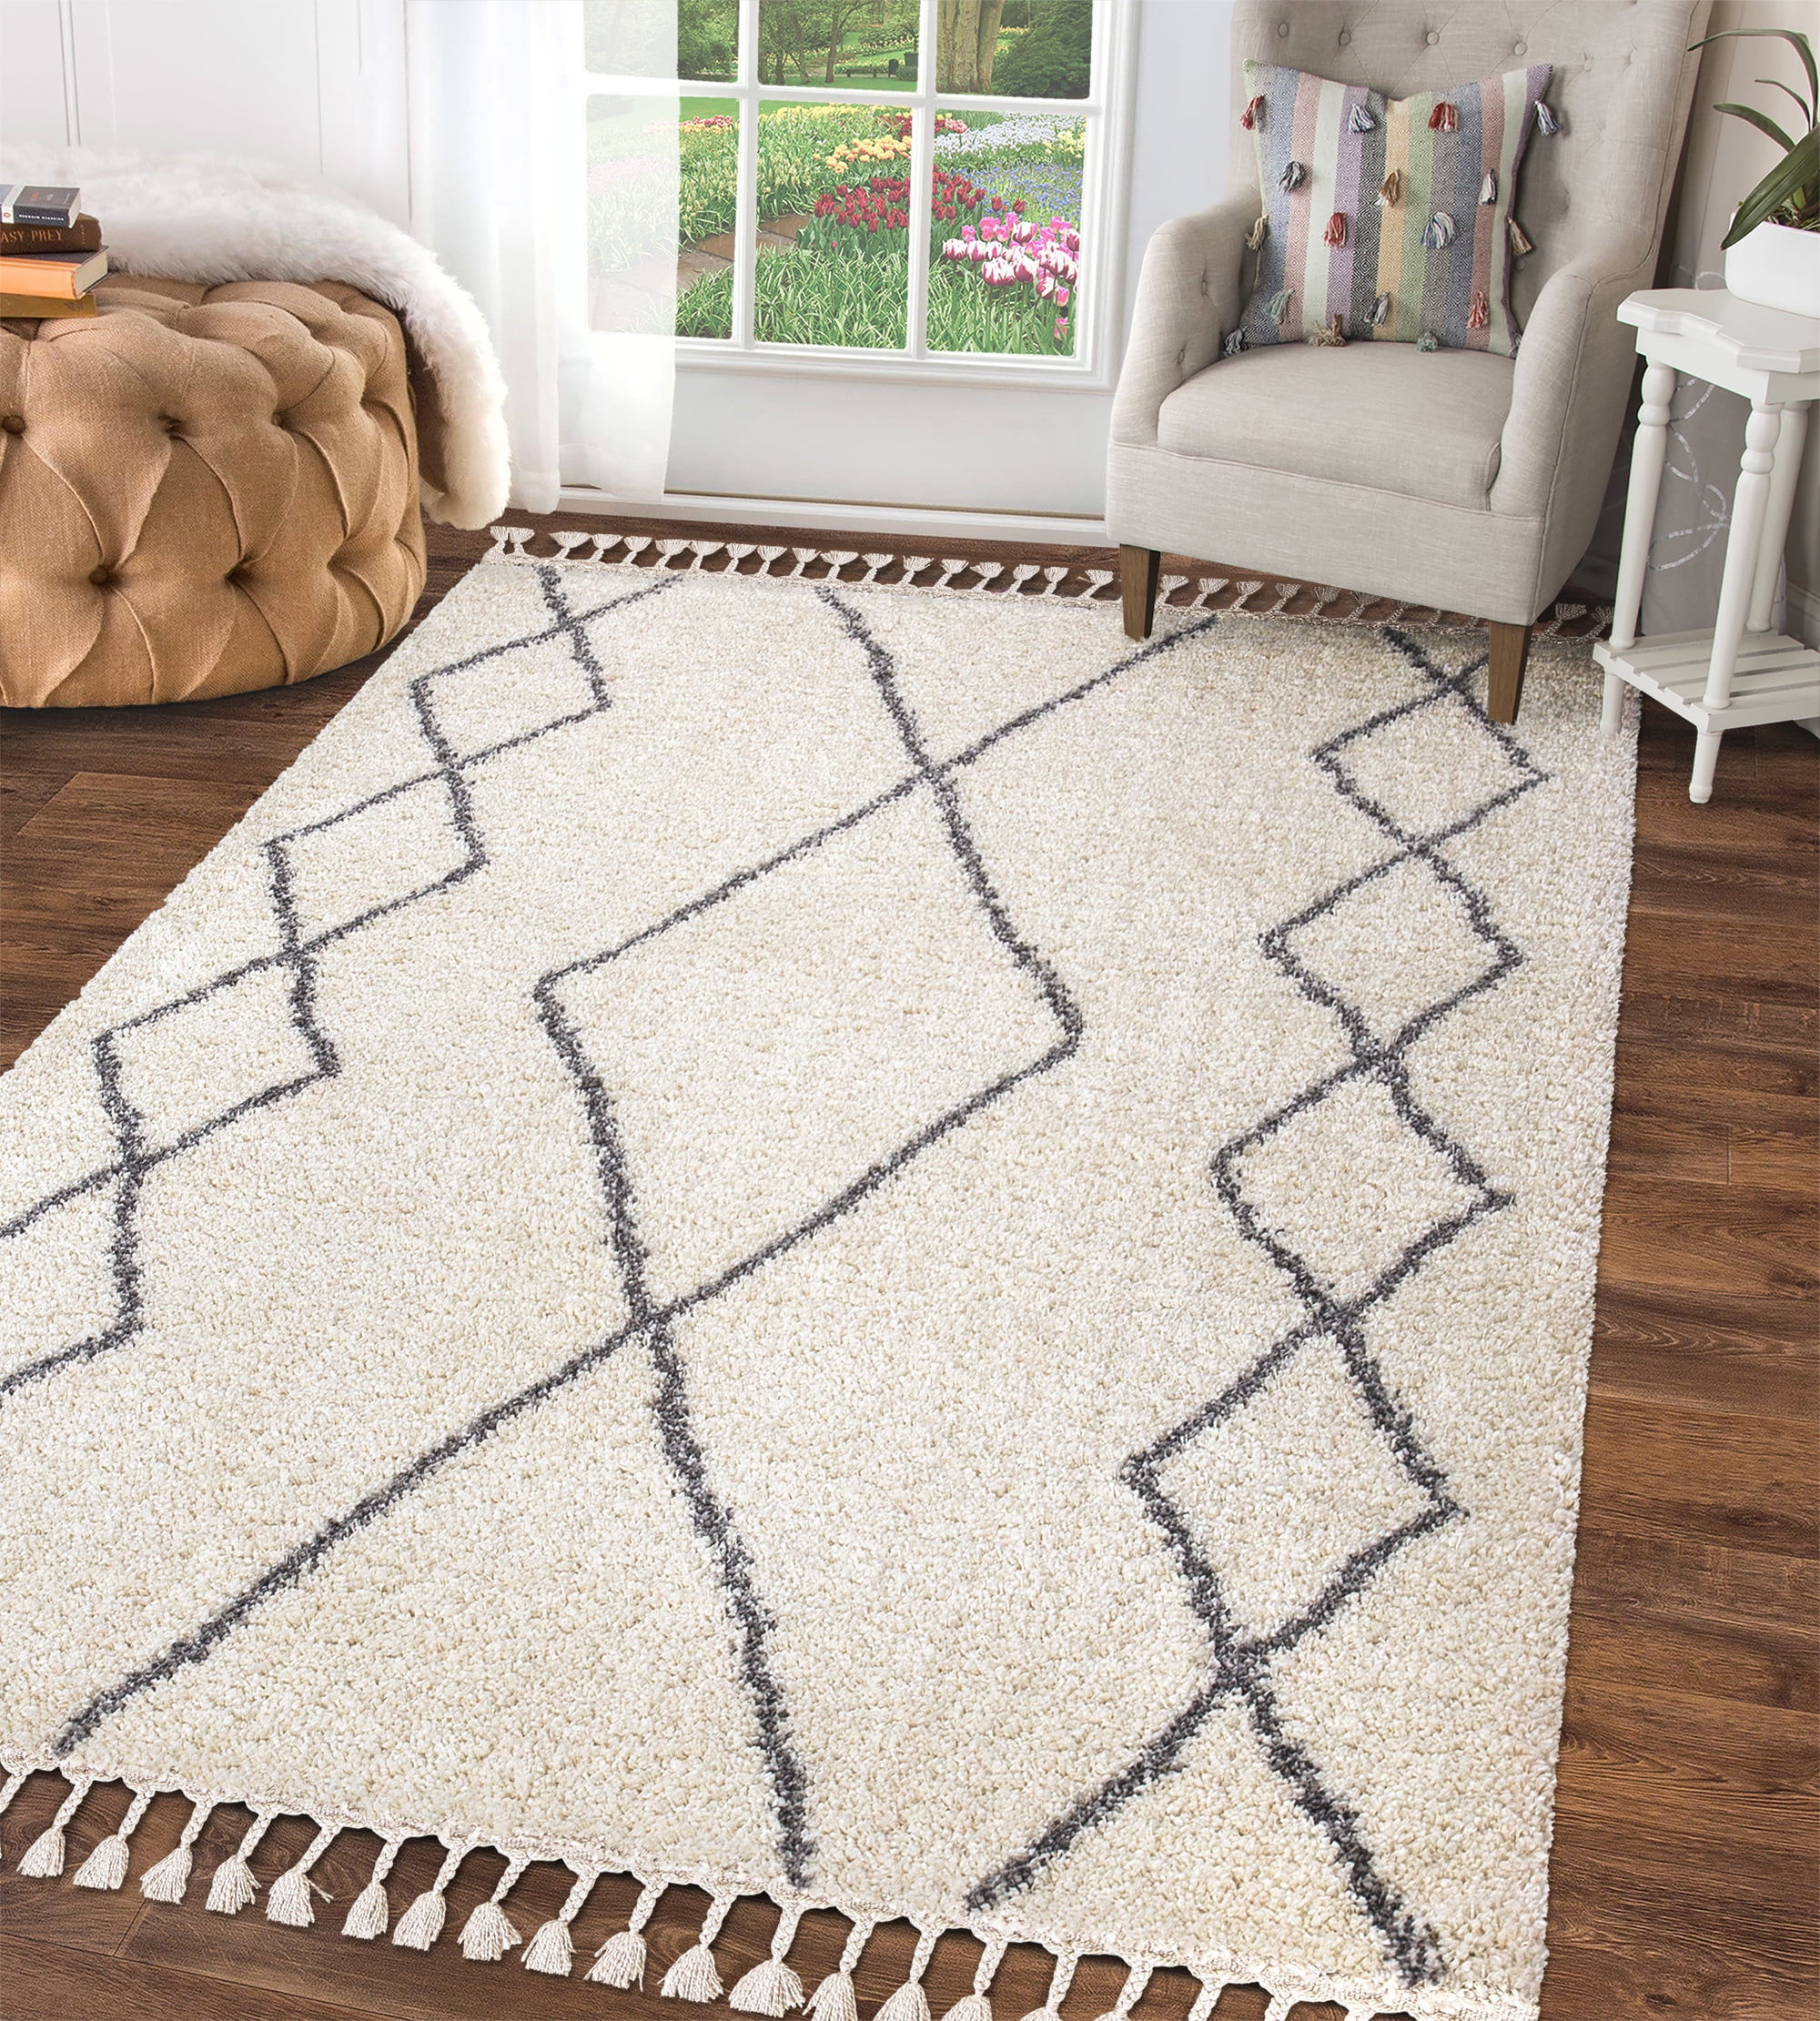 Long Narrow Cream Trellis Shaggy Runner Rugs Soft Non Shed Cosy Hallway Runners 